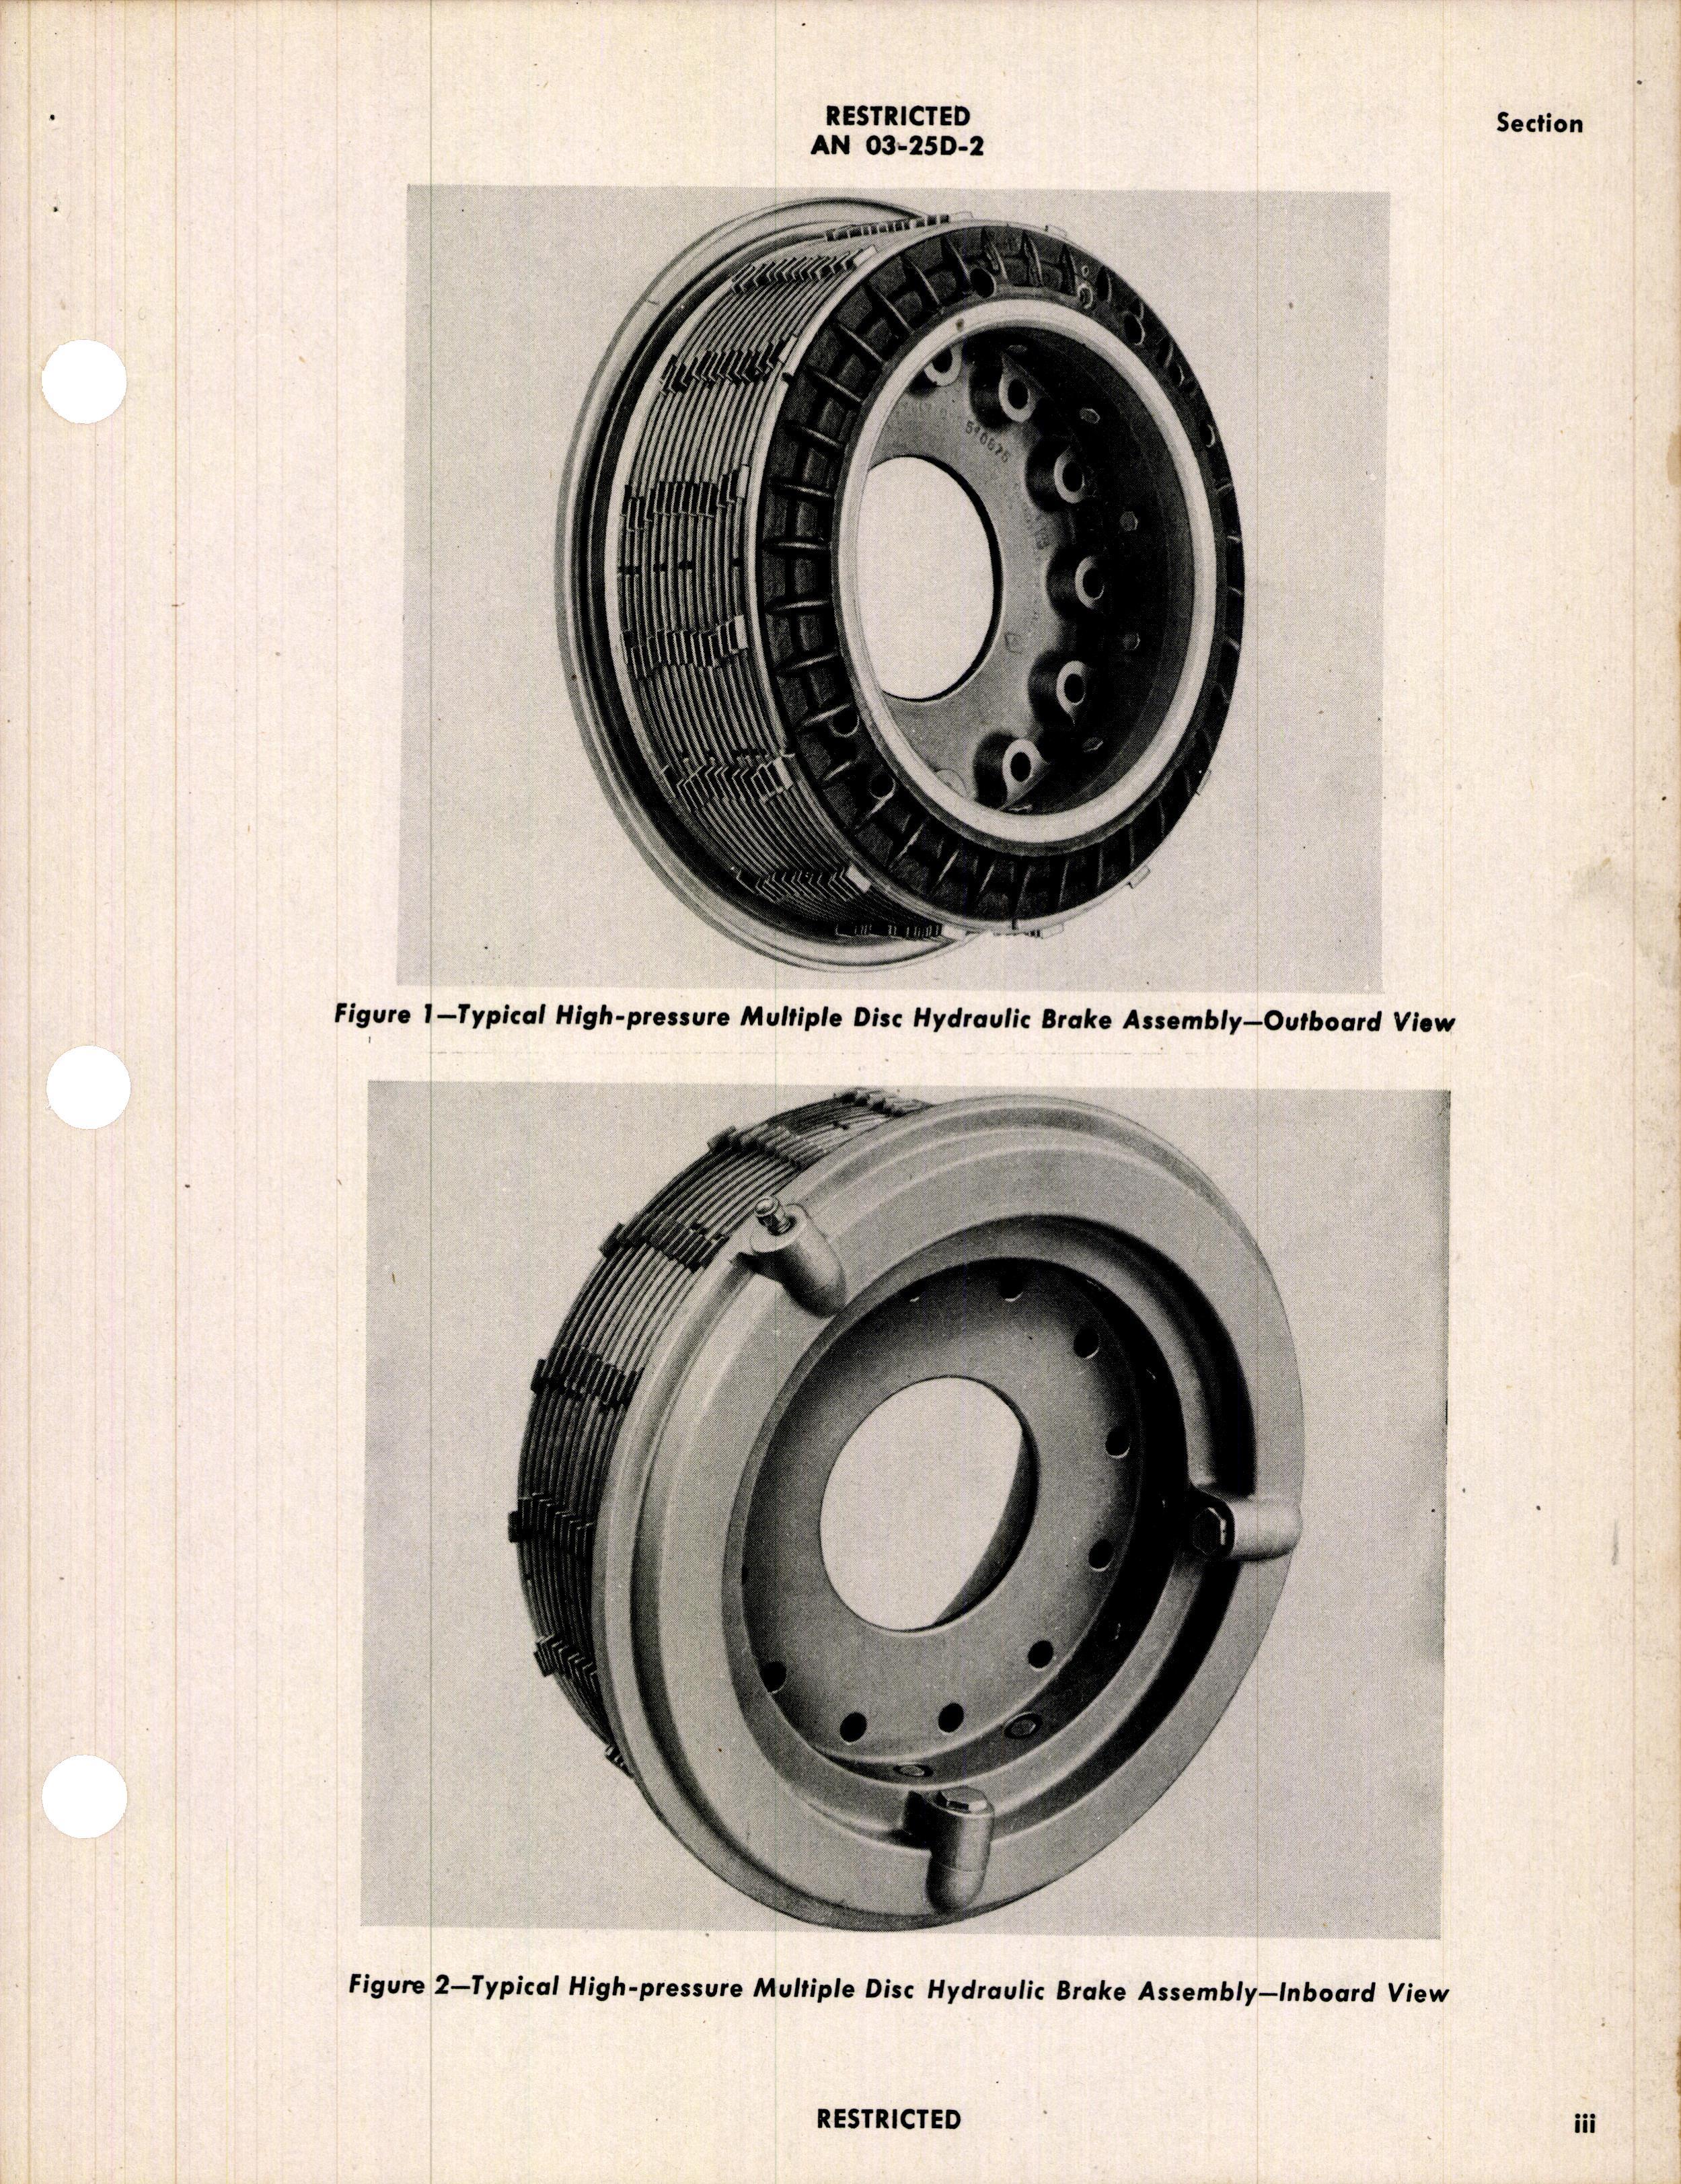 Sample page 5 from AirCorps Library document: Operation, Service, & Overhaul Instructions with Parts Catalog for Goodyear Multiple Disc Brakes